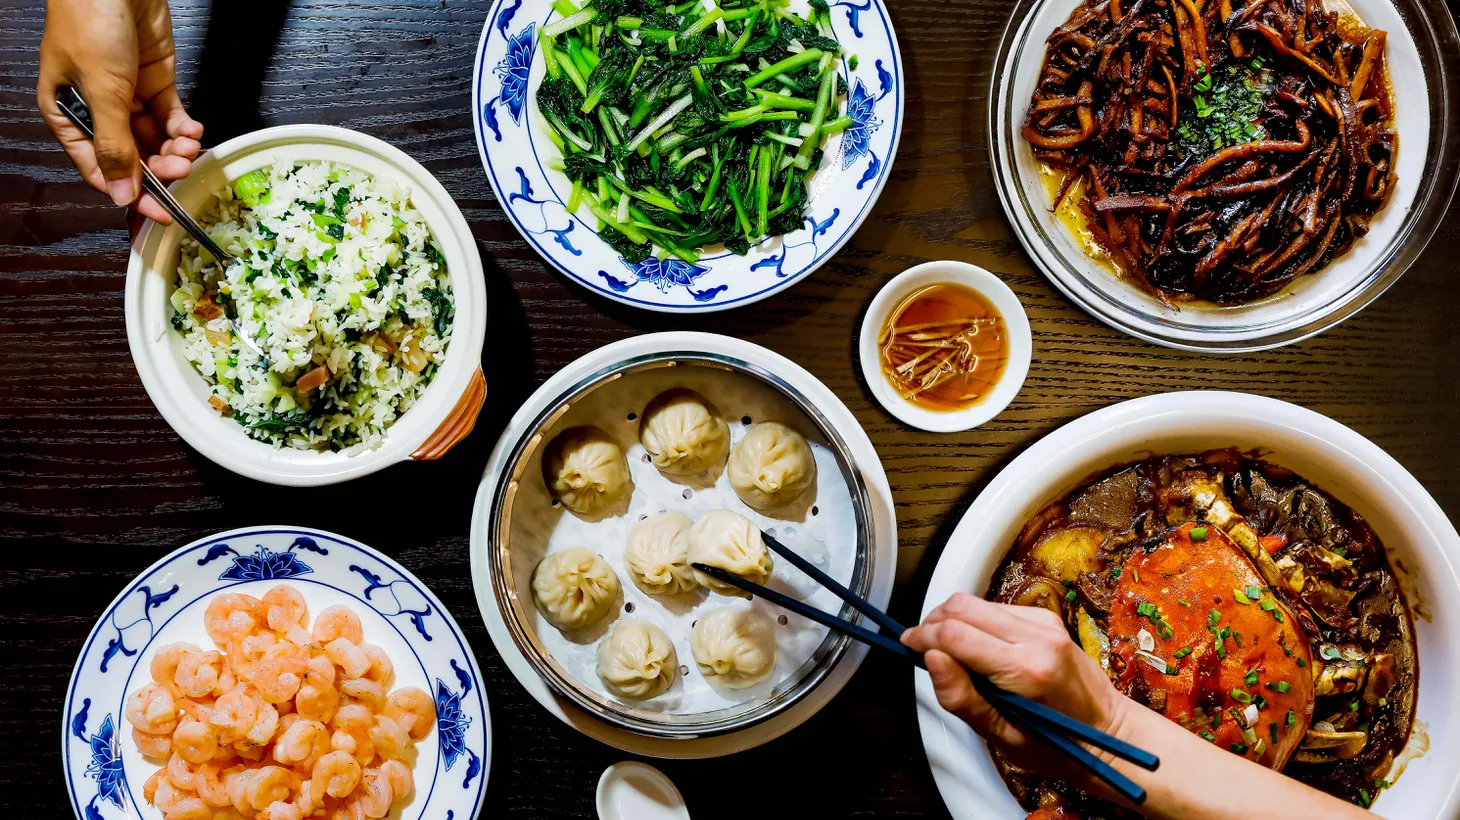 With 150 items on the WangJia menu, Bill Addison recommends being particularly mindful of the Shanghainese seafood dishes, and asking for help when ordering.